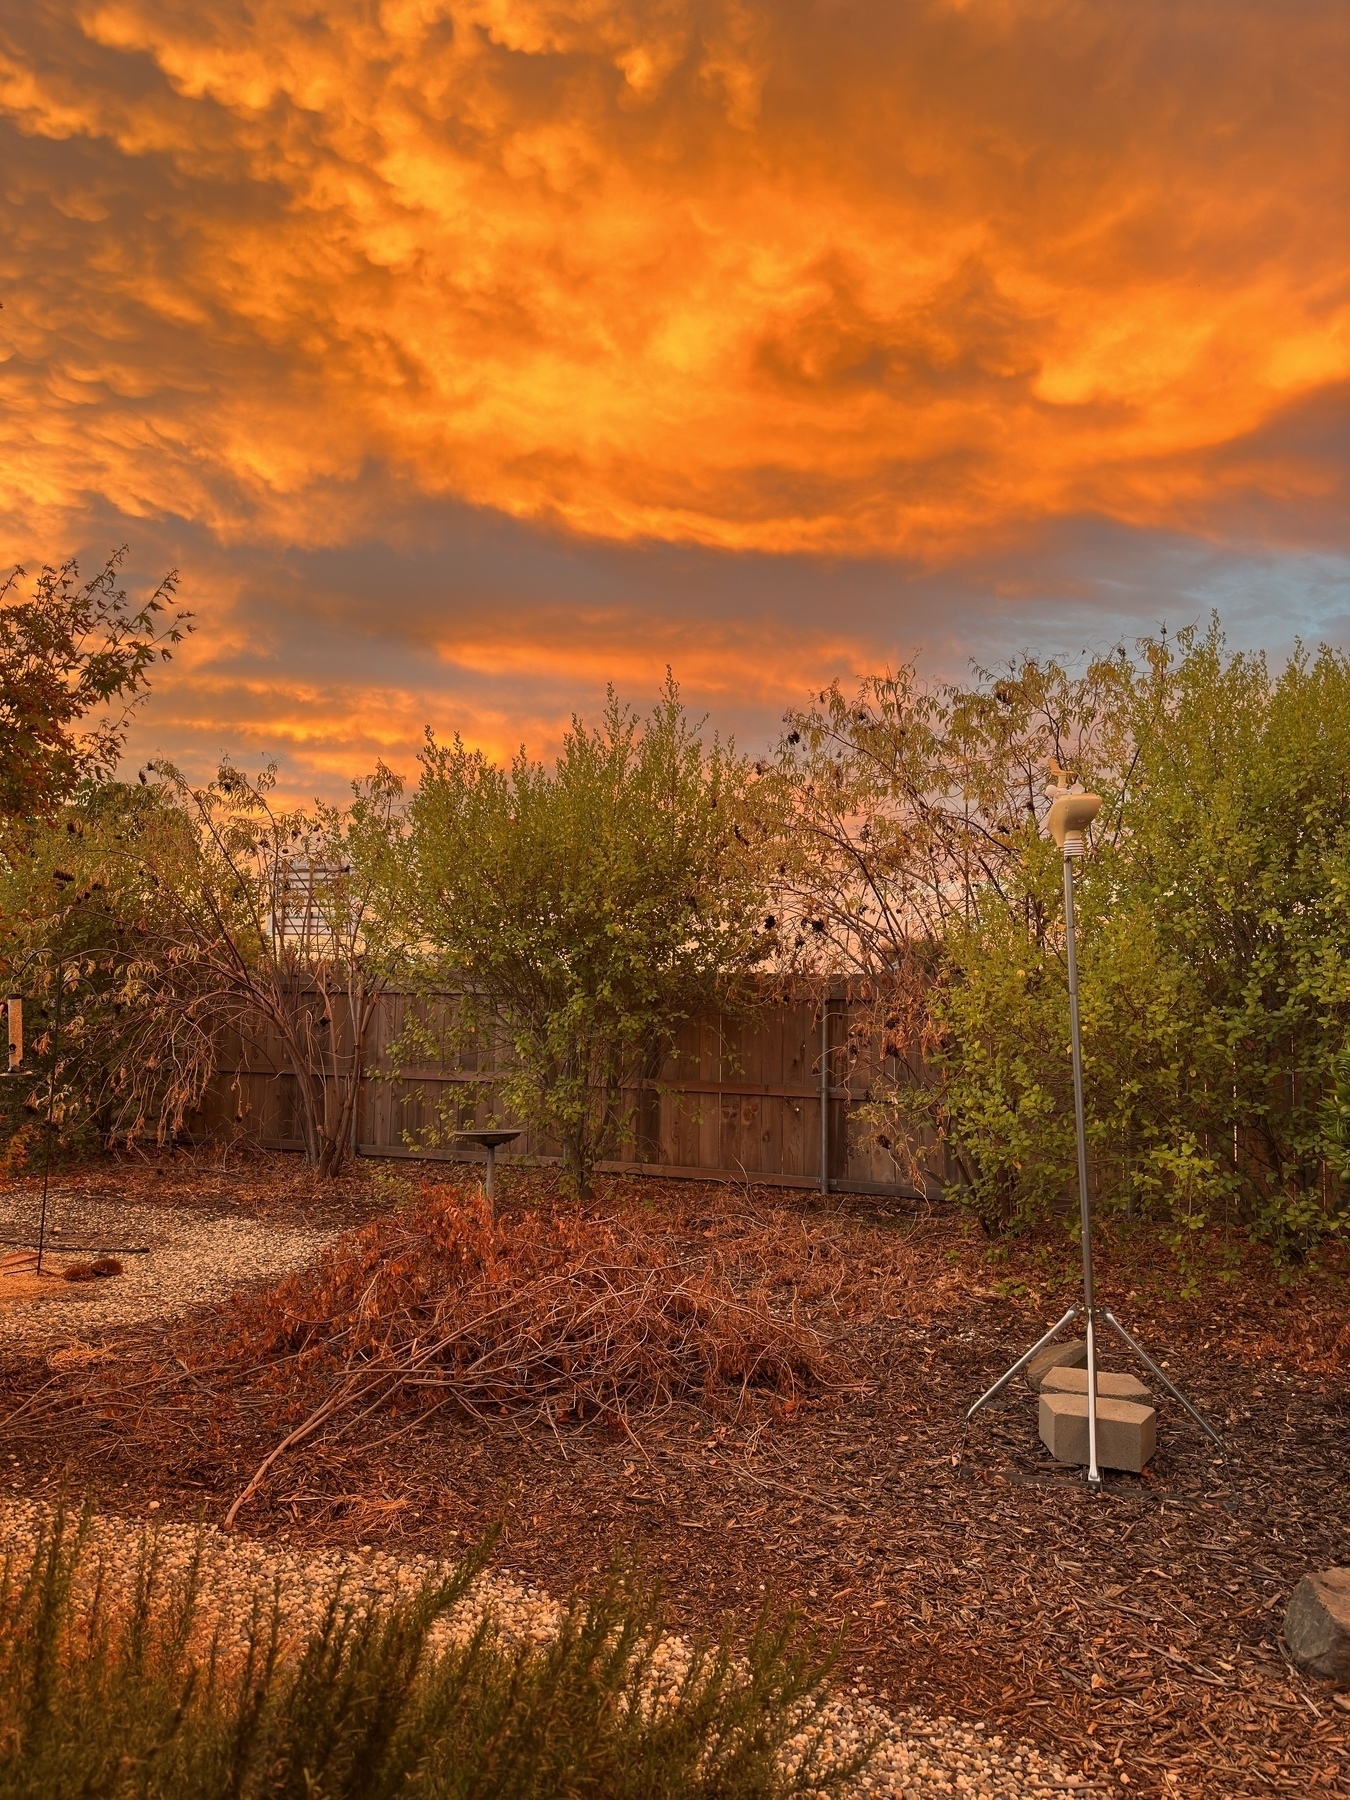 A backyard with a weather station and native plants. Early morning sunlight is reflecting off the bottoms of low clouds, resulting in a bright orange glow.